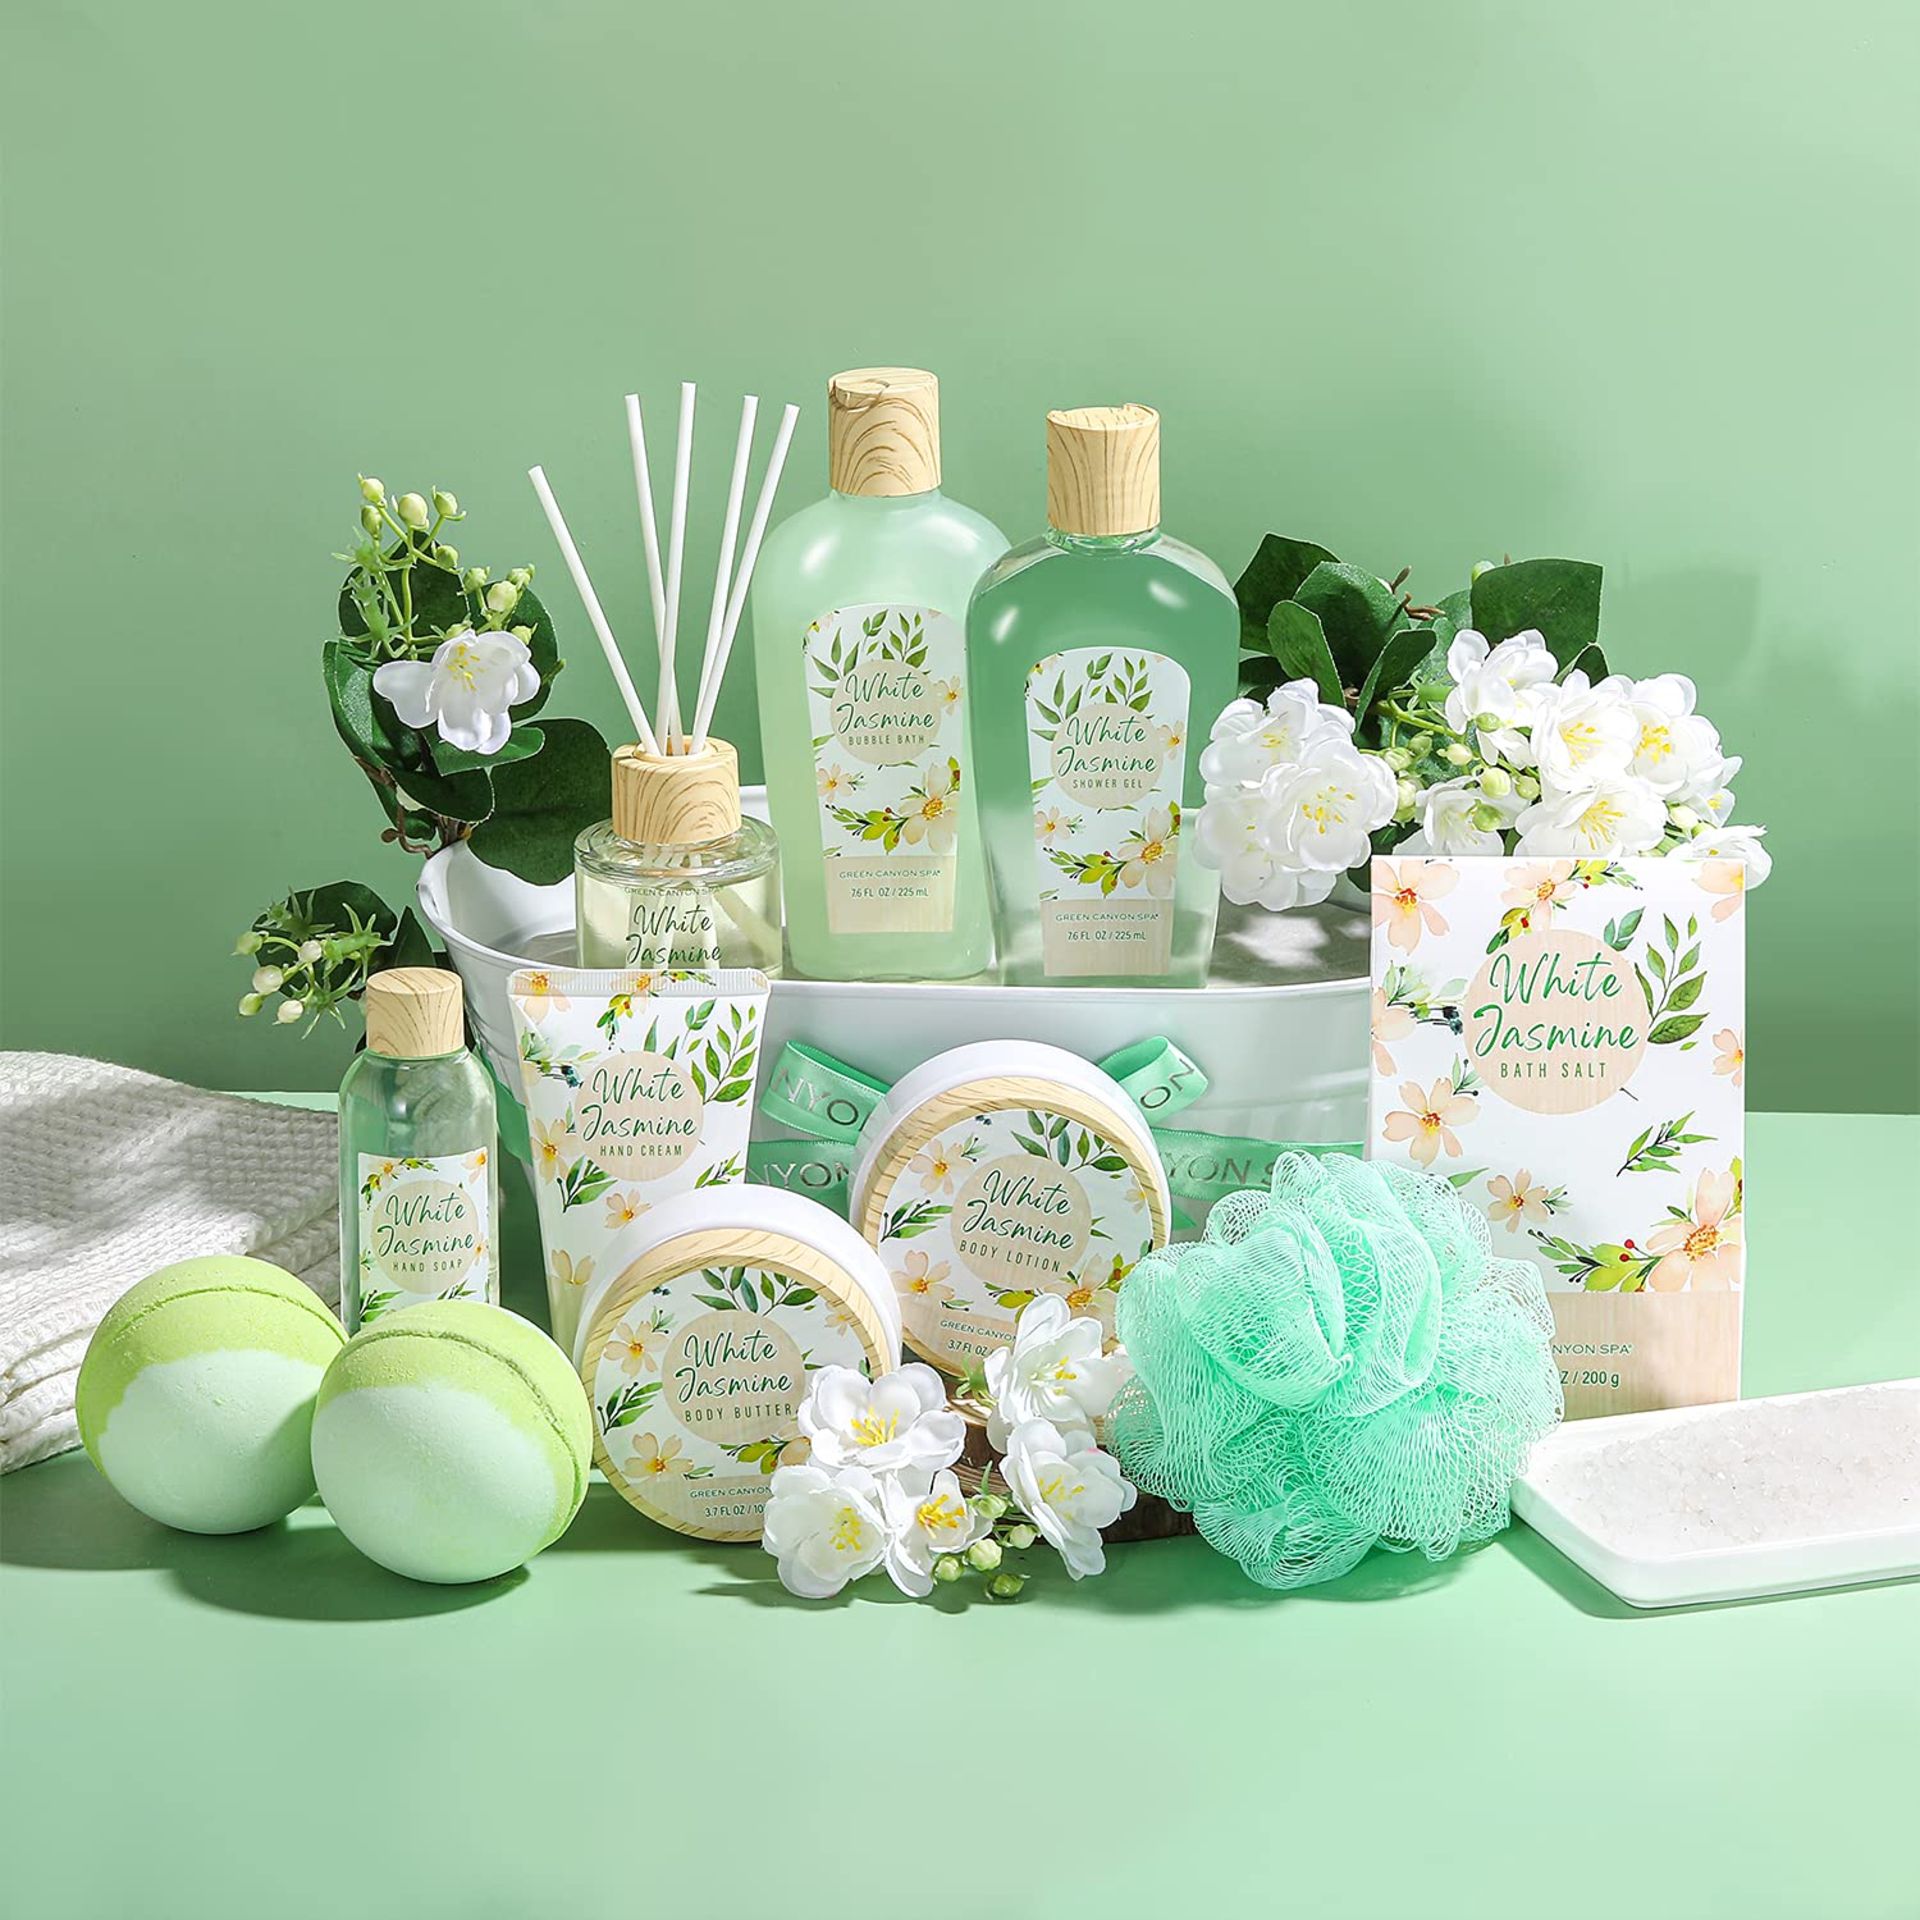 12 X NEW PACKAGED - Green Canyon 12 Pcs White Jasmine Bath Gift Sets Home Spa Gift Baskets Green - Image 2 of 3